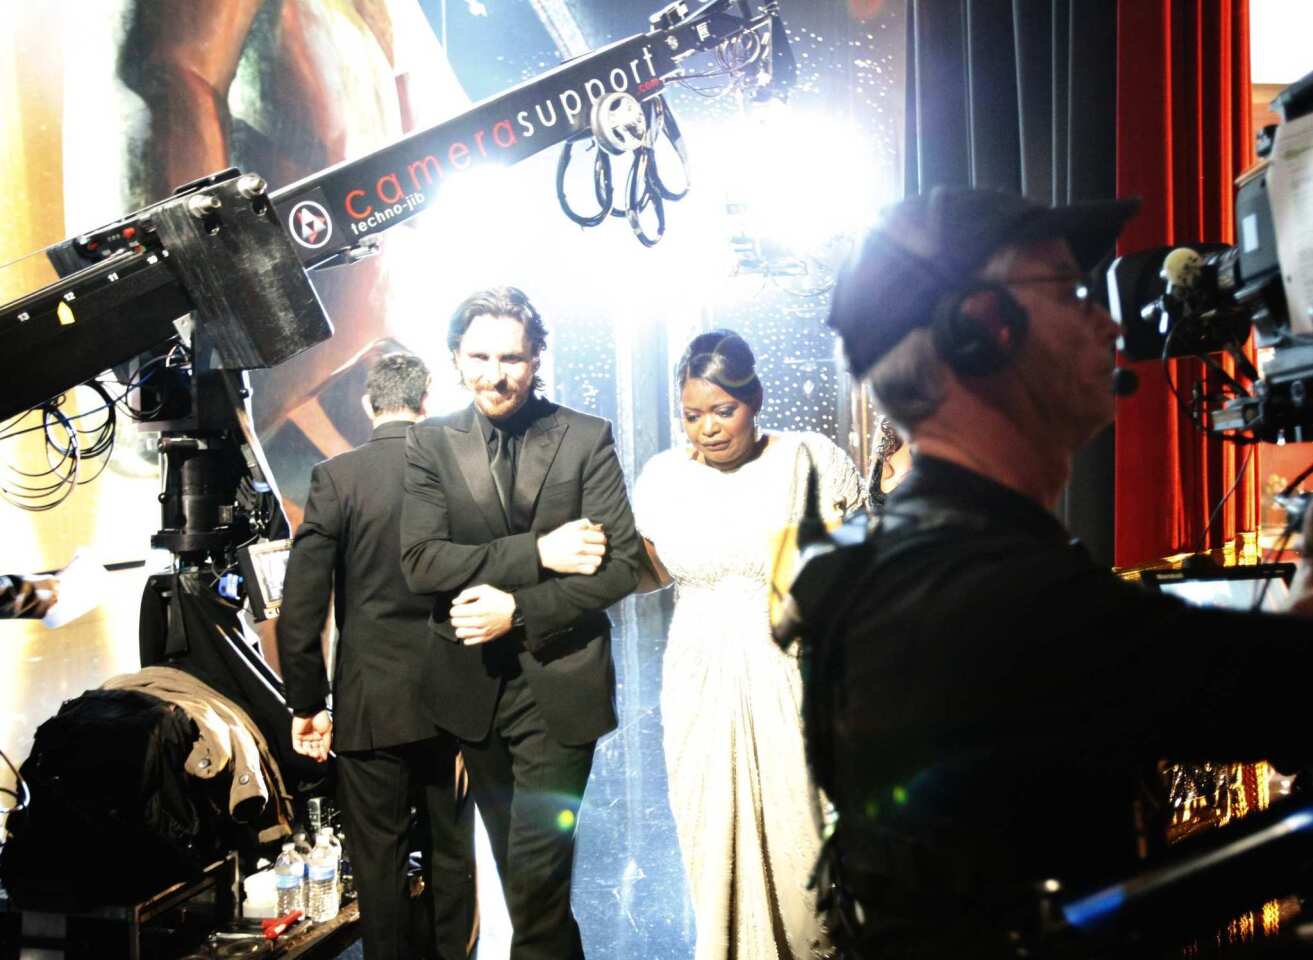 Christian Bale escorts Octavia Spencer offstage after her acceptance speech at the 2012 Academy Awards in Hollywood. Bale had announced Spencer as winner of the Academy Award for her supporting role in "The Help."